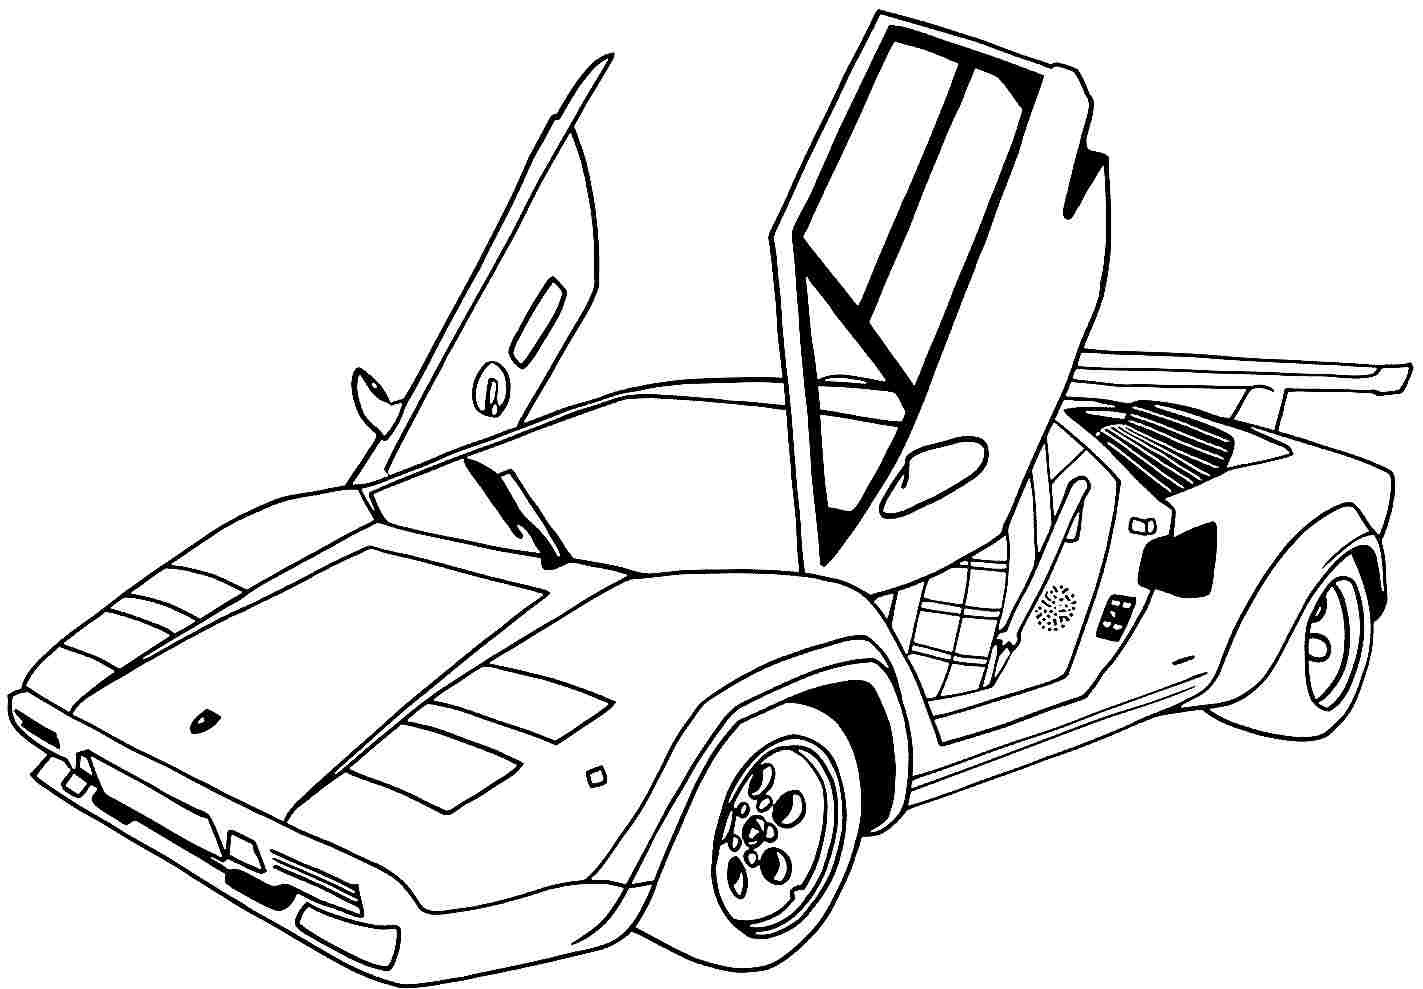 Ferrari Car Coloring Pages At GetColorings Free Printable Colorings Pages To Print And Color